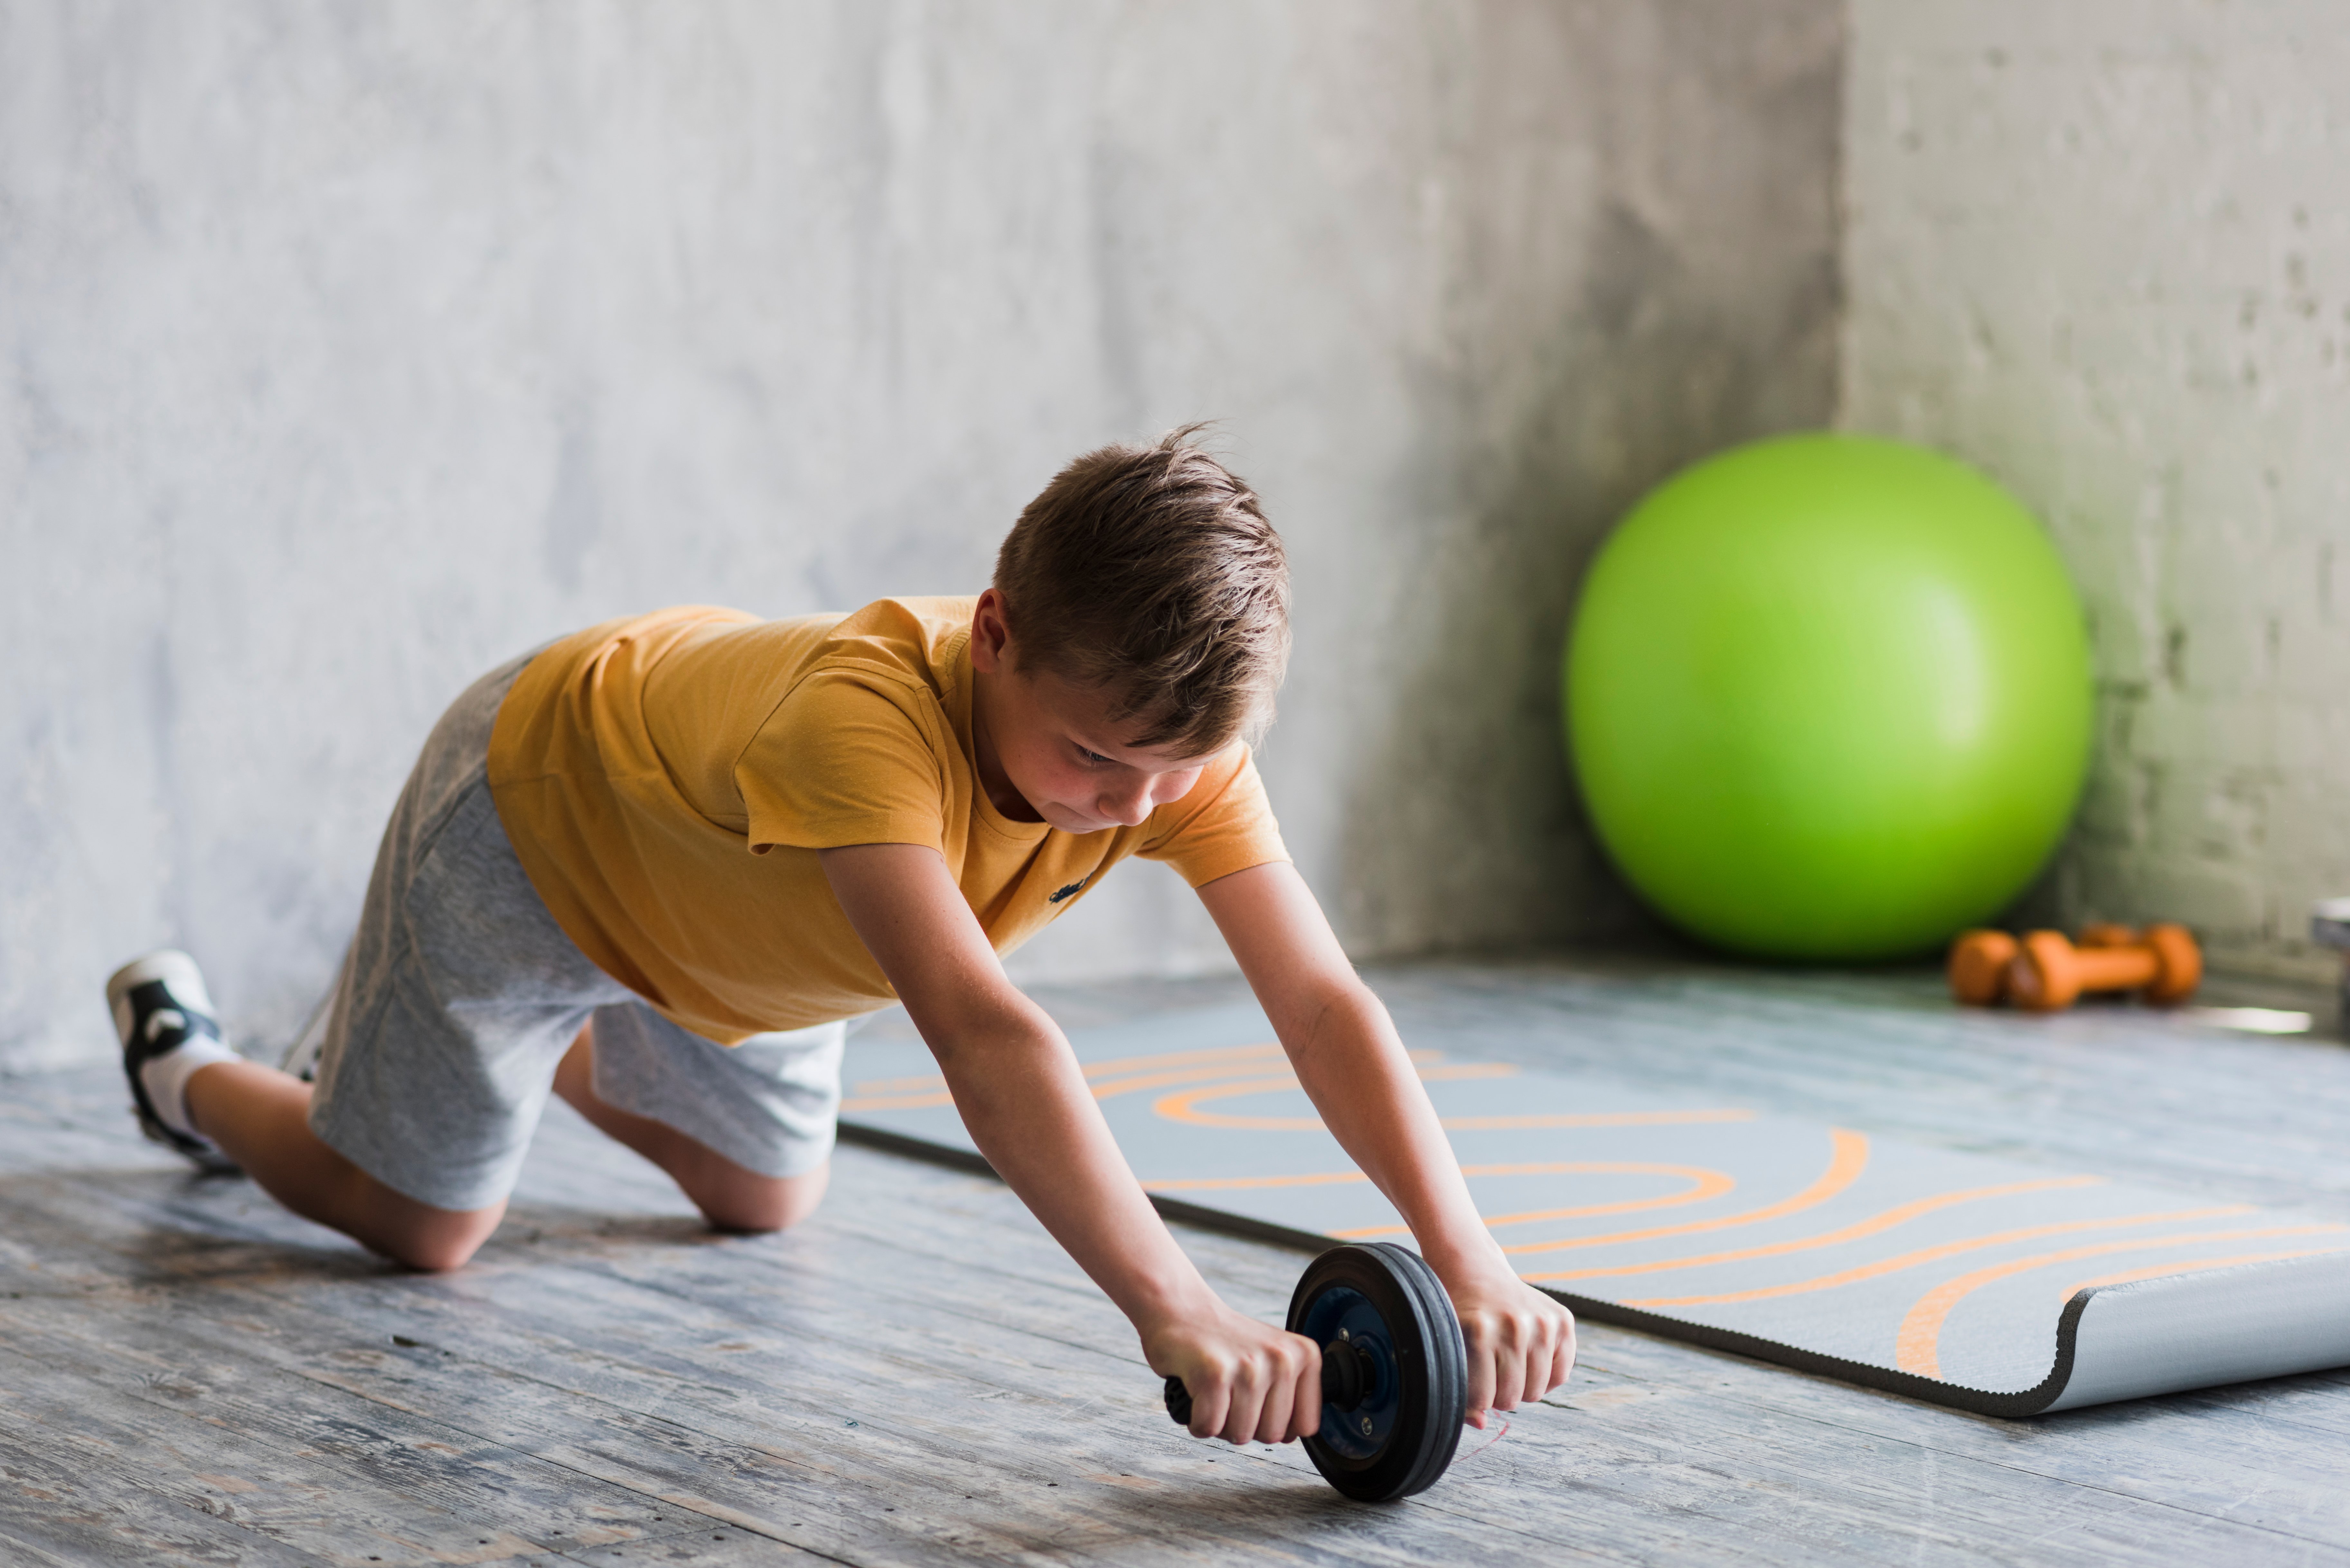 close-up-of-a-boy-doing-ab-wheel-rollout-exercise-on-hardwood-floor